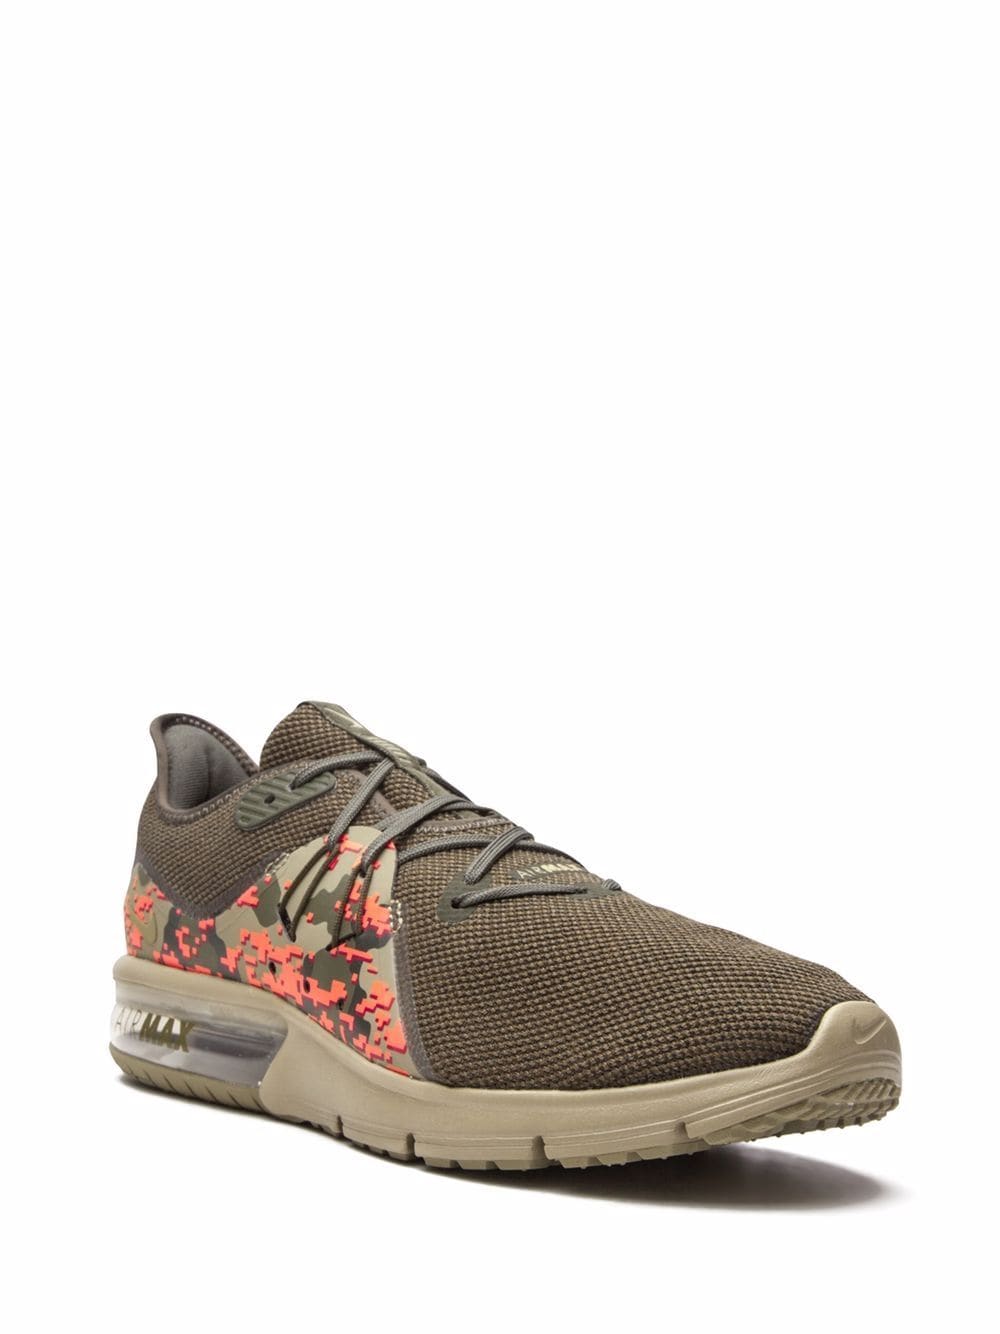 Nike Air Max Sequent 3 C sneakers - Groen